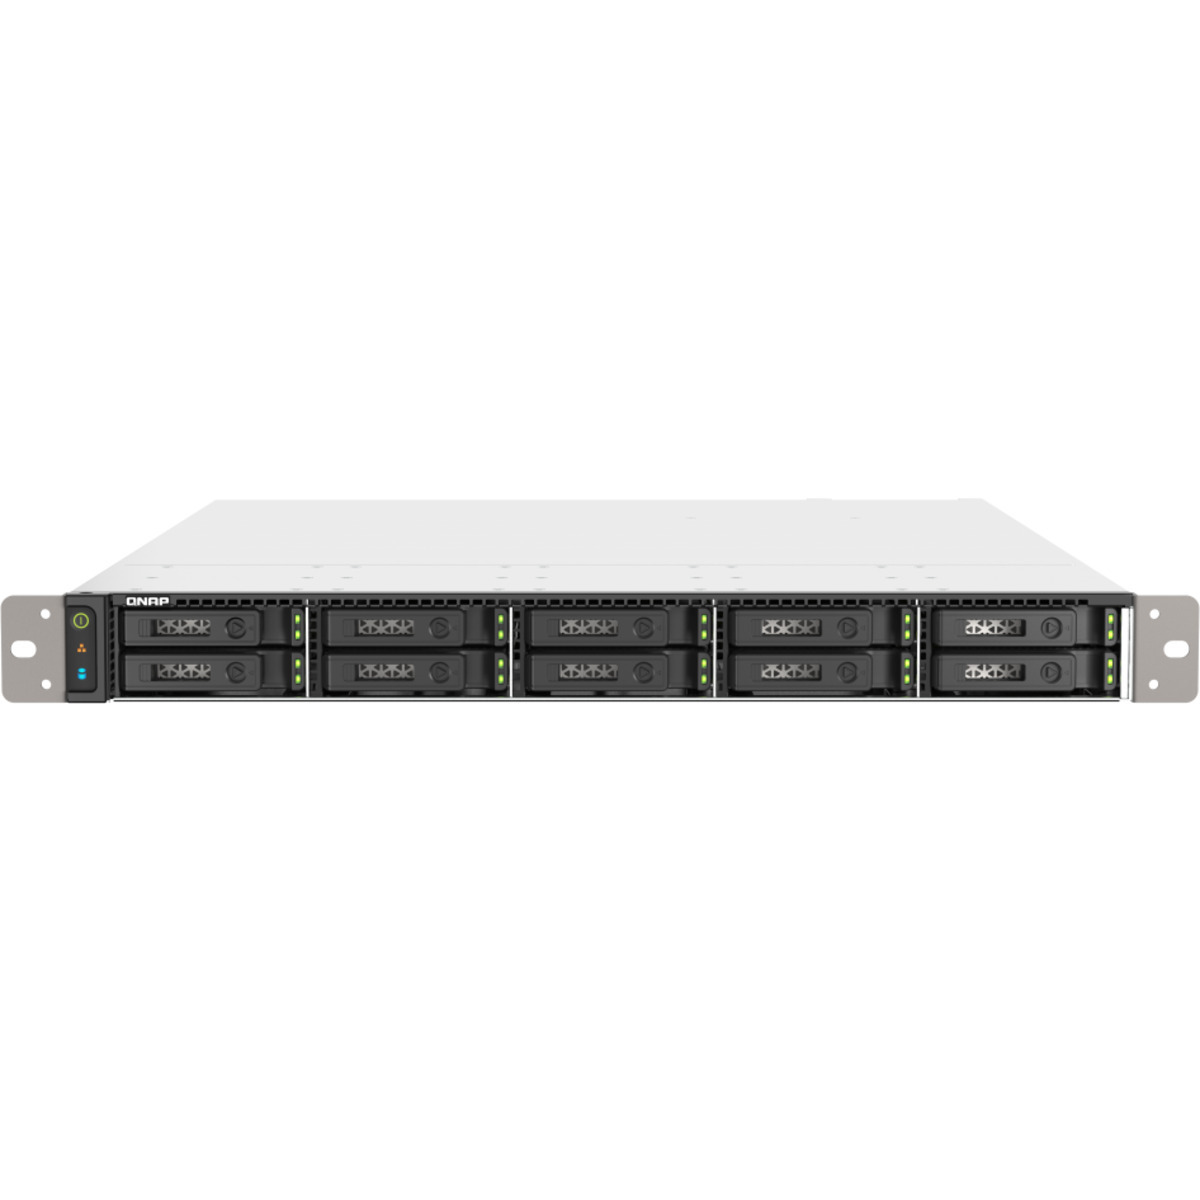 buy $8512 QNAP TS-h1090FU-7232P 20tb RackMount NAS - Network Attached Storage Device 10x2000gb Western Digital Red SA500 WDS200T1R0A 2.5 560/530MB/s SATA 6Gb/s SSD NAS Class Drives Installed - Burn-In Tested - nas headquarters buy network attached storage server device das new raid-5 free shipping usa TS-h1090FU-7232P